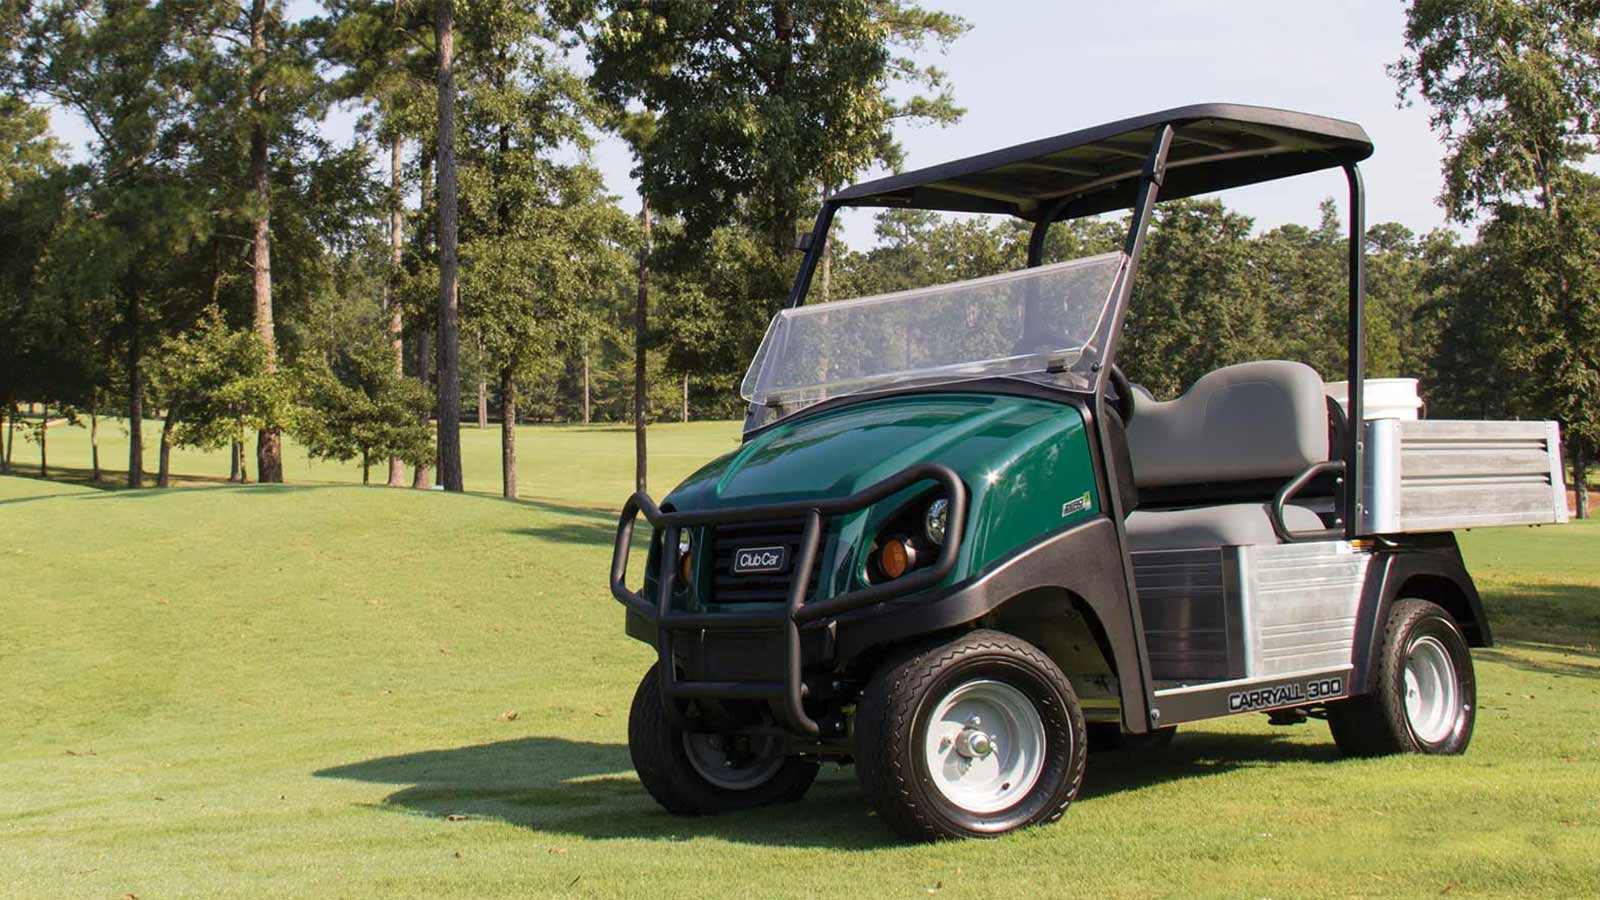 Golf course utility vehicle Carryall 300 turf utility vehicle on golf course